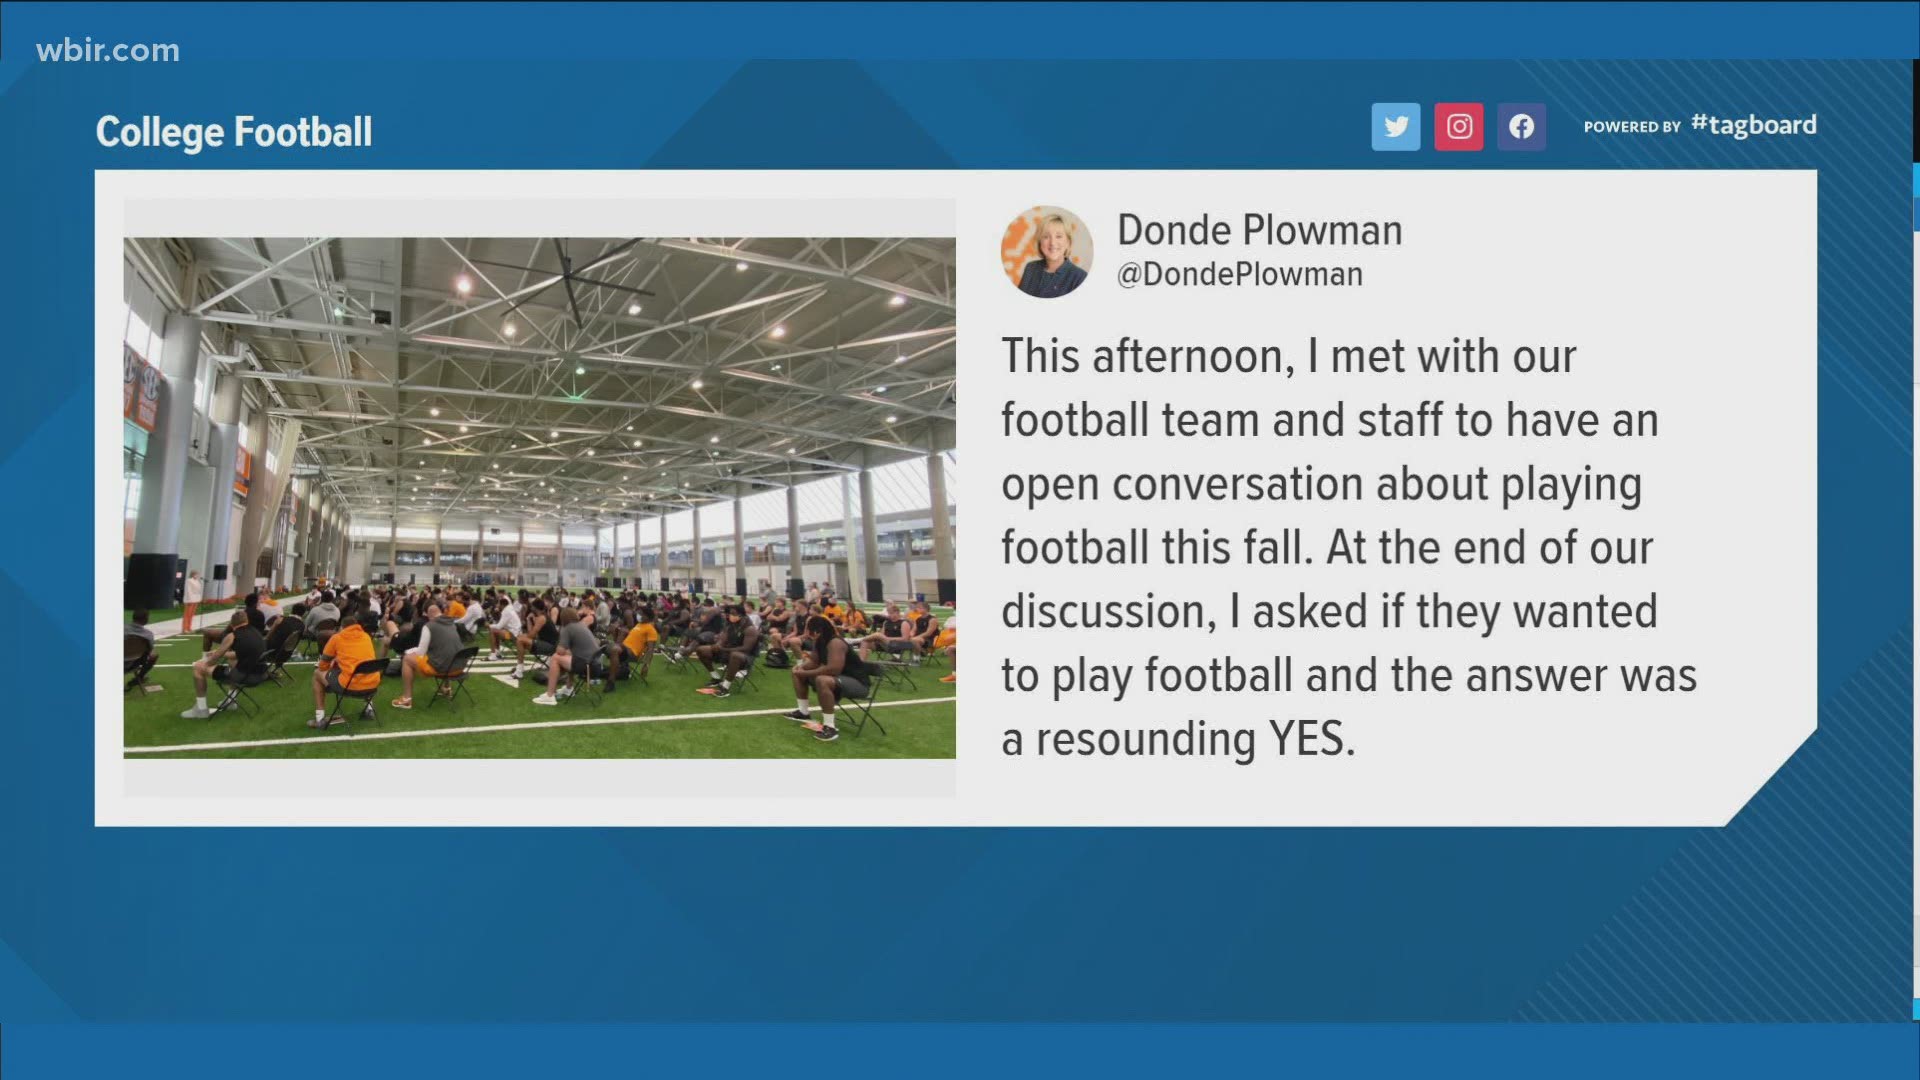 UT Chancellor Donde Plowman tweeted saying she talked with the football team. She said, "I asked if they wanted to play football and the answer was YES."